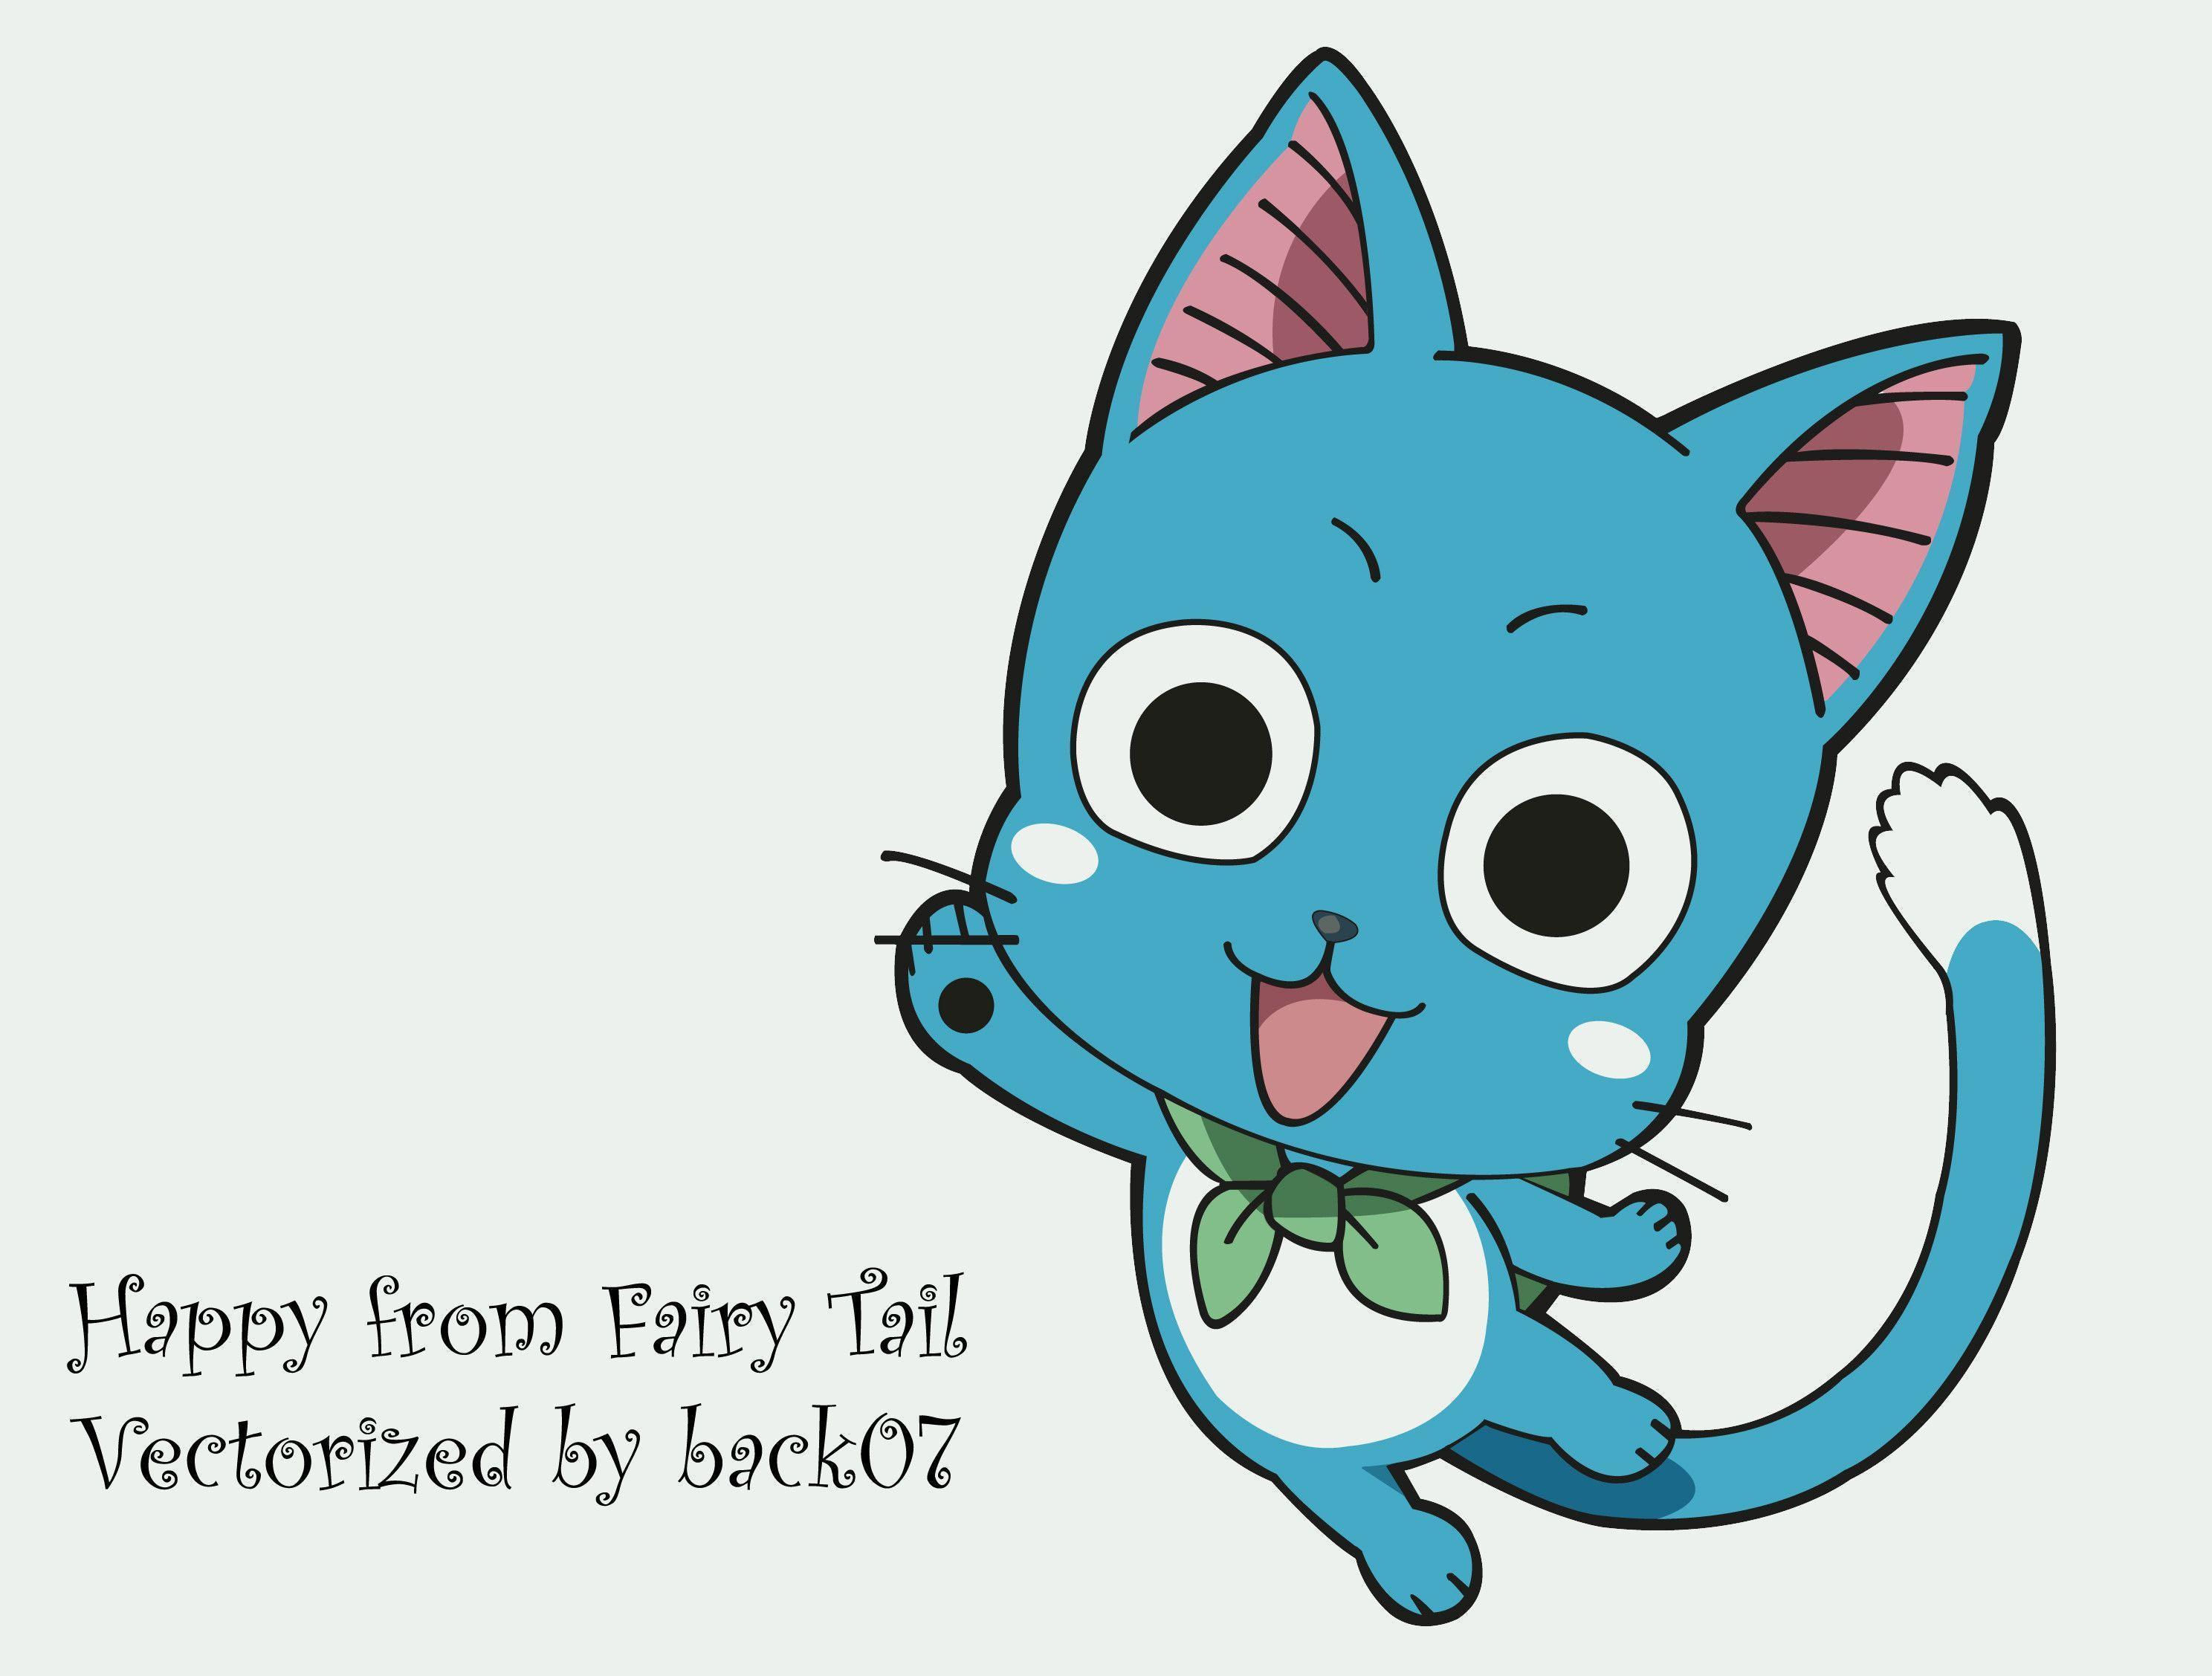 fairy tail happy Search Engine